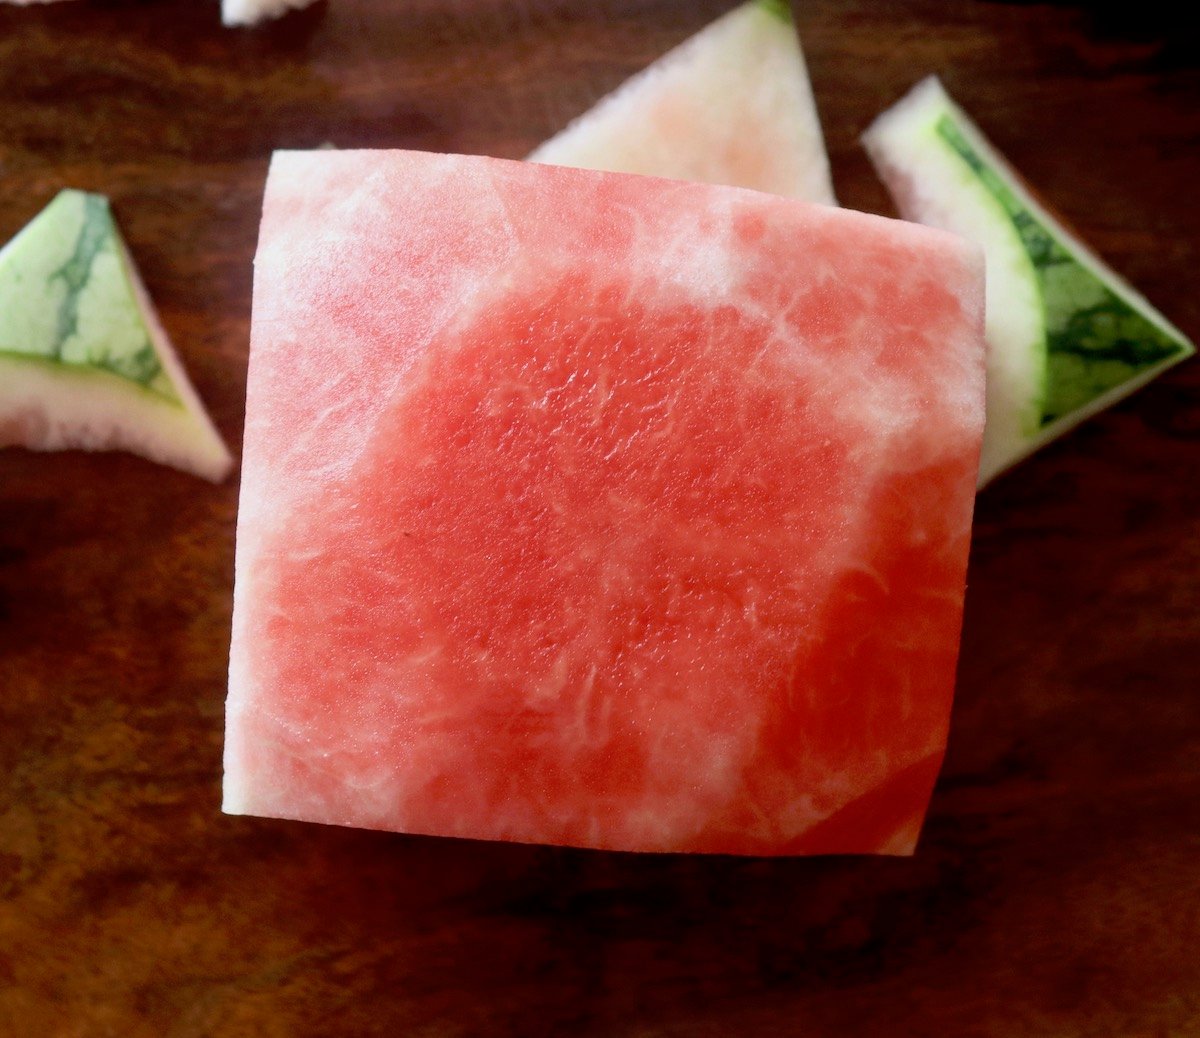 Big, square chunk of watermelon on wooden cutting board.